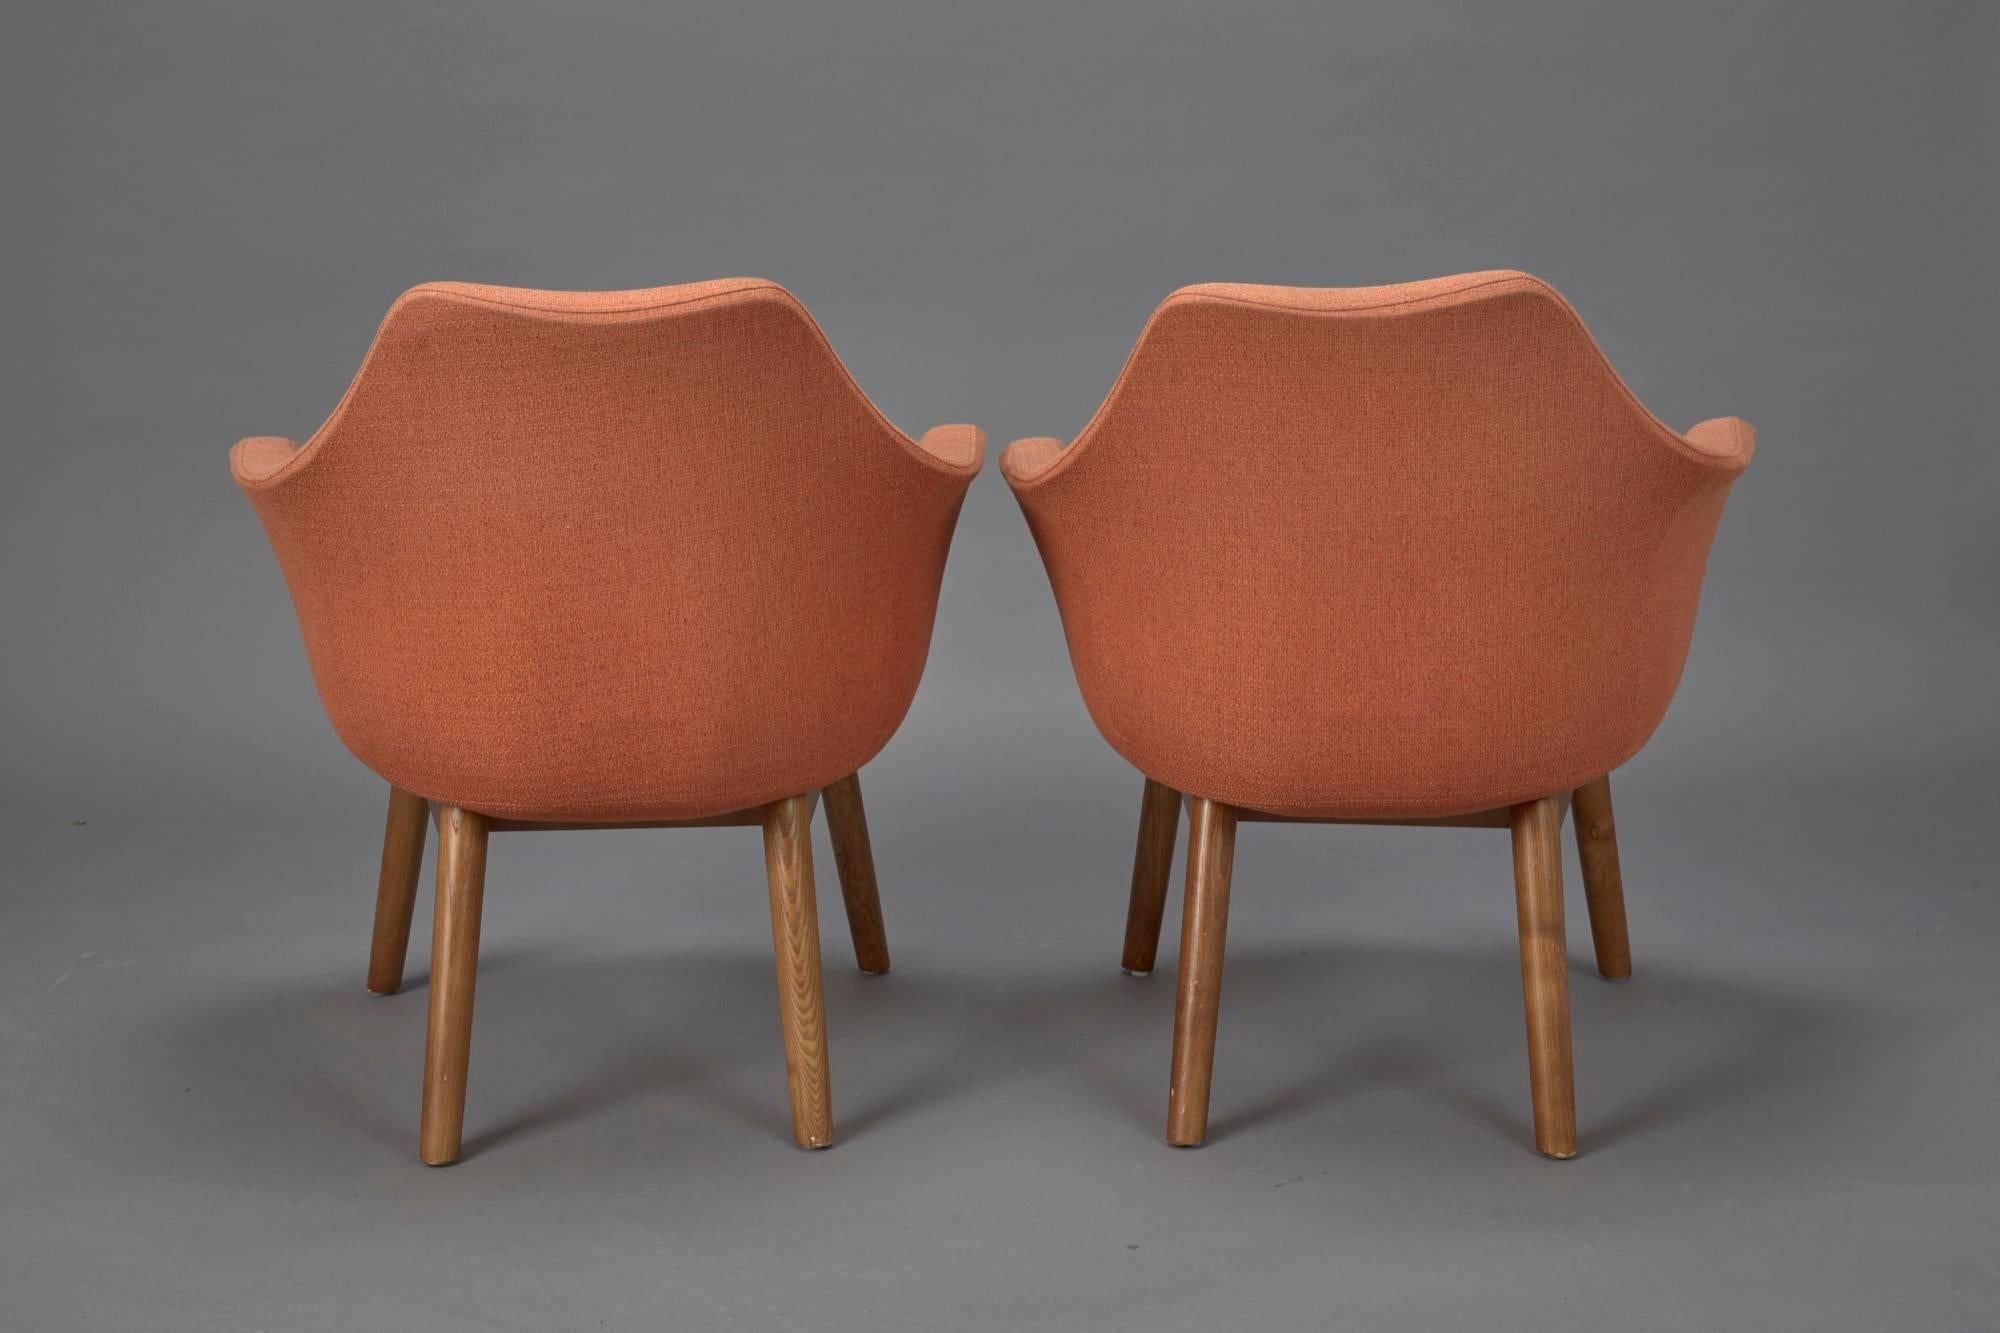 Pair of Orange Fabric Mid-Century Modern Armchairs in Style of Eero Saarinen In Good Condition For Sale In Belmont, MA